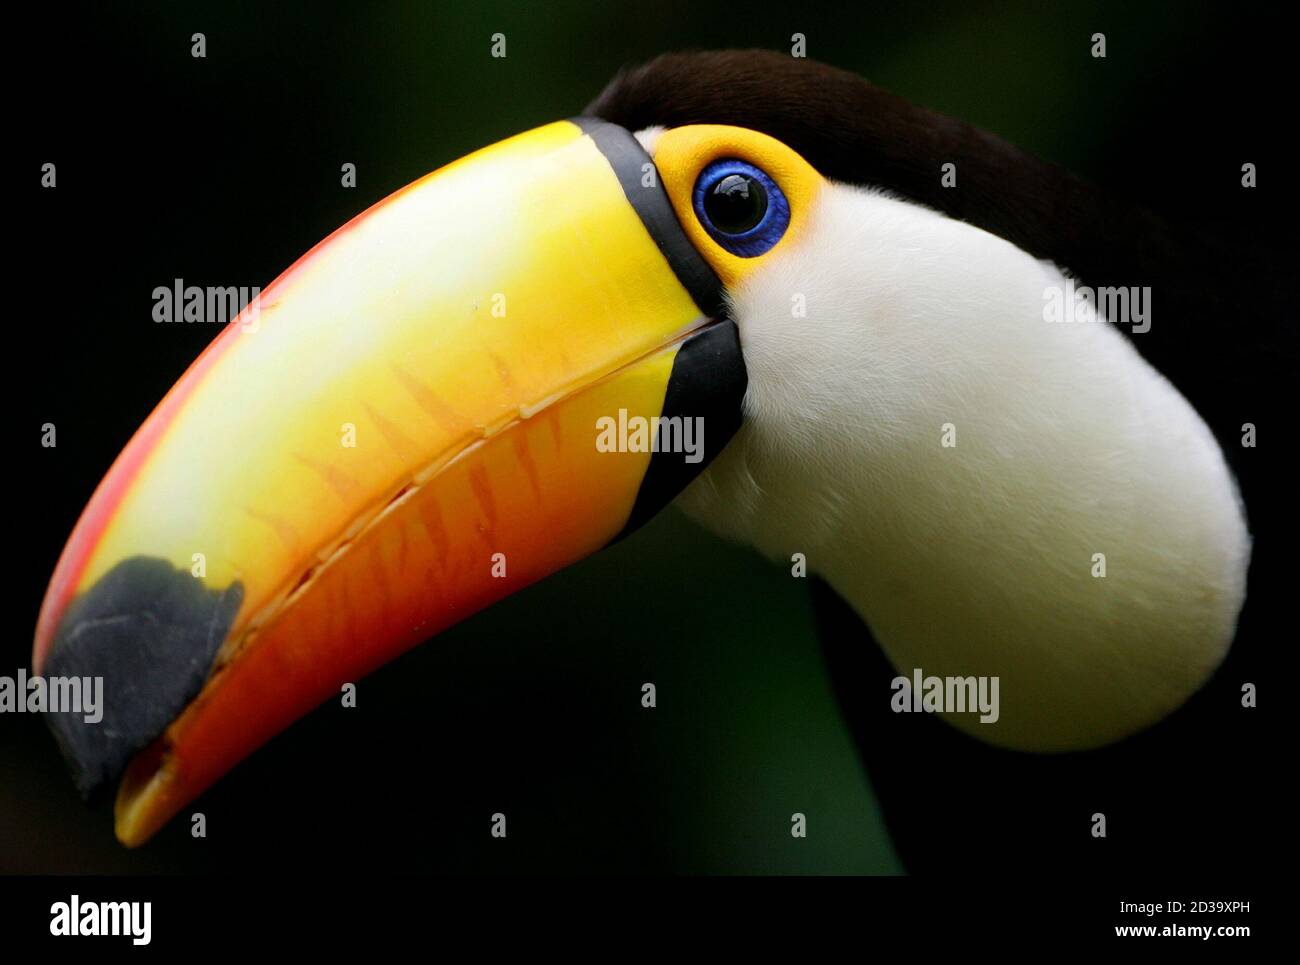 A Toco Toucan, also known as the Ramphastos toco, rests in the bird enclosure of the Faunia animal theme park in Madrid April 27, 2005. Toucans, which live between 10-15 years, live in the wild in the tropical rainforests from the [Guianas through Brazil to northern Argentina] and are fruit eaters. Stock Photo